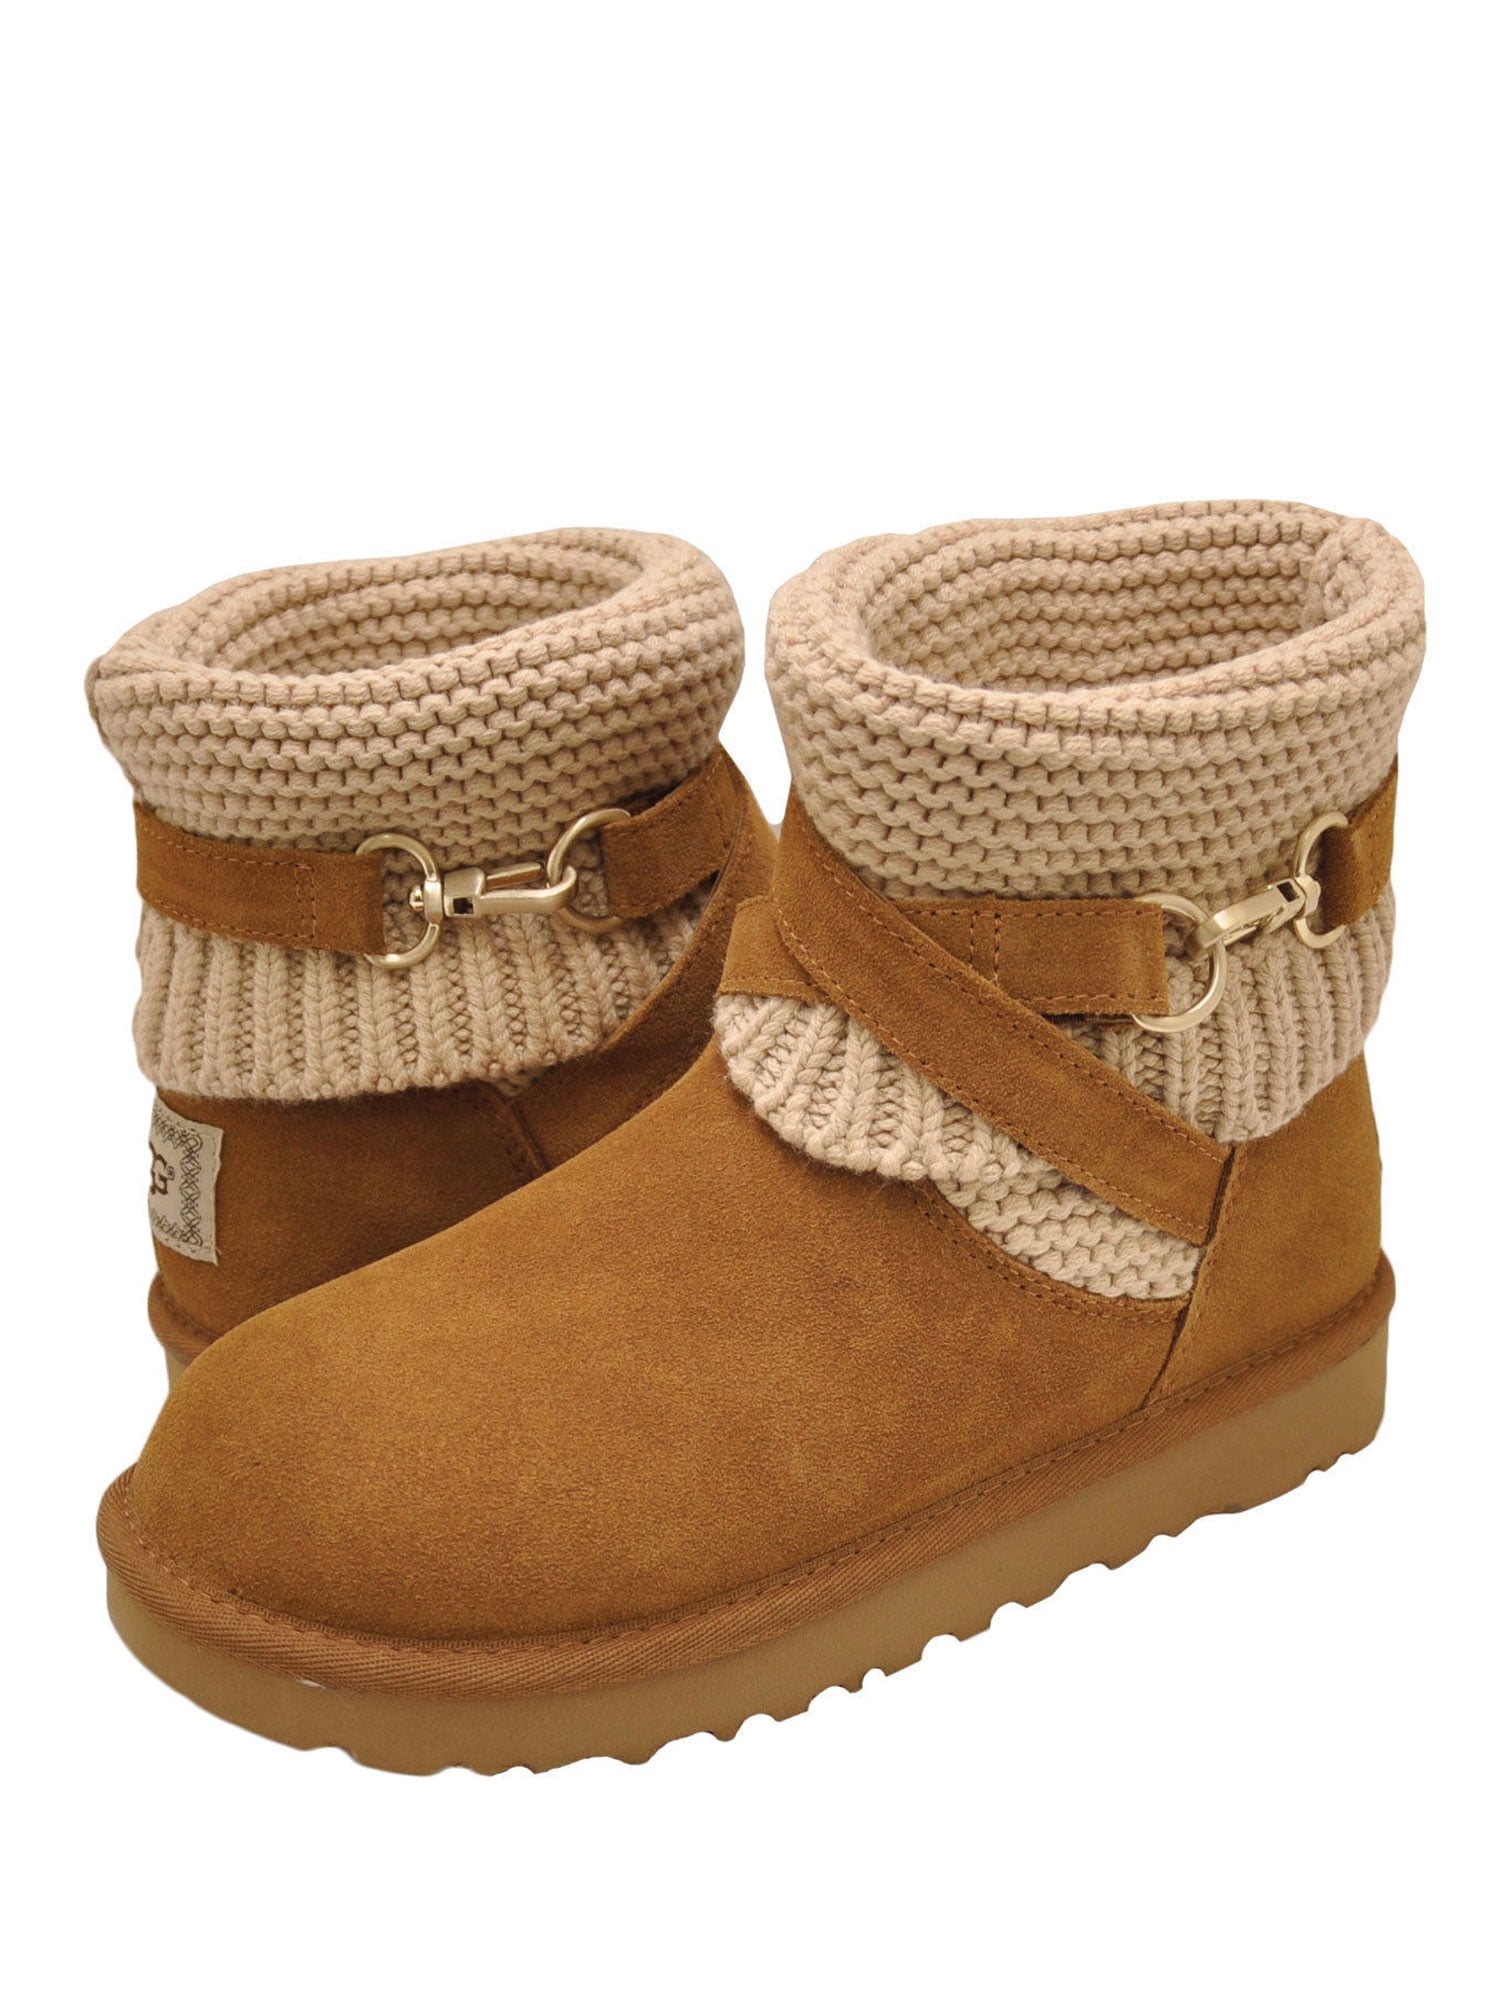 uggs with the strap